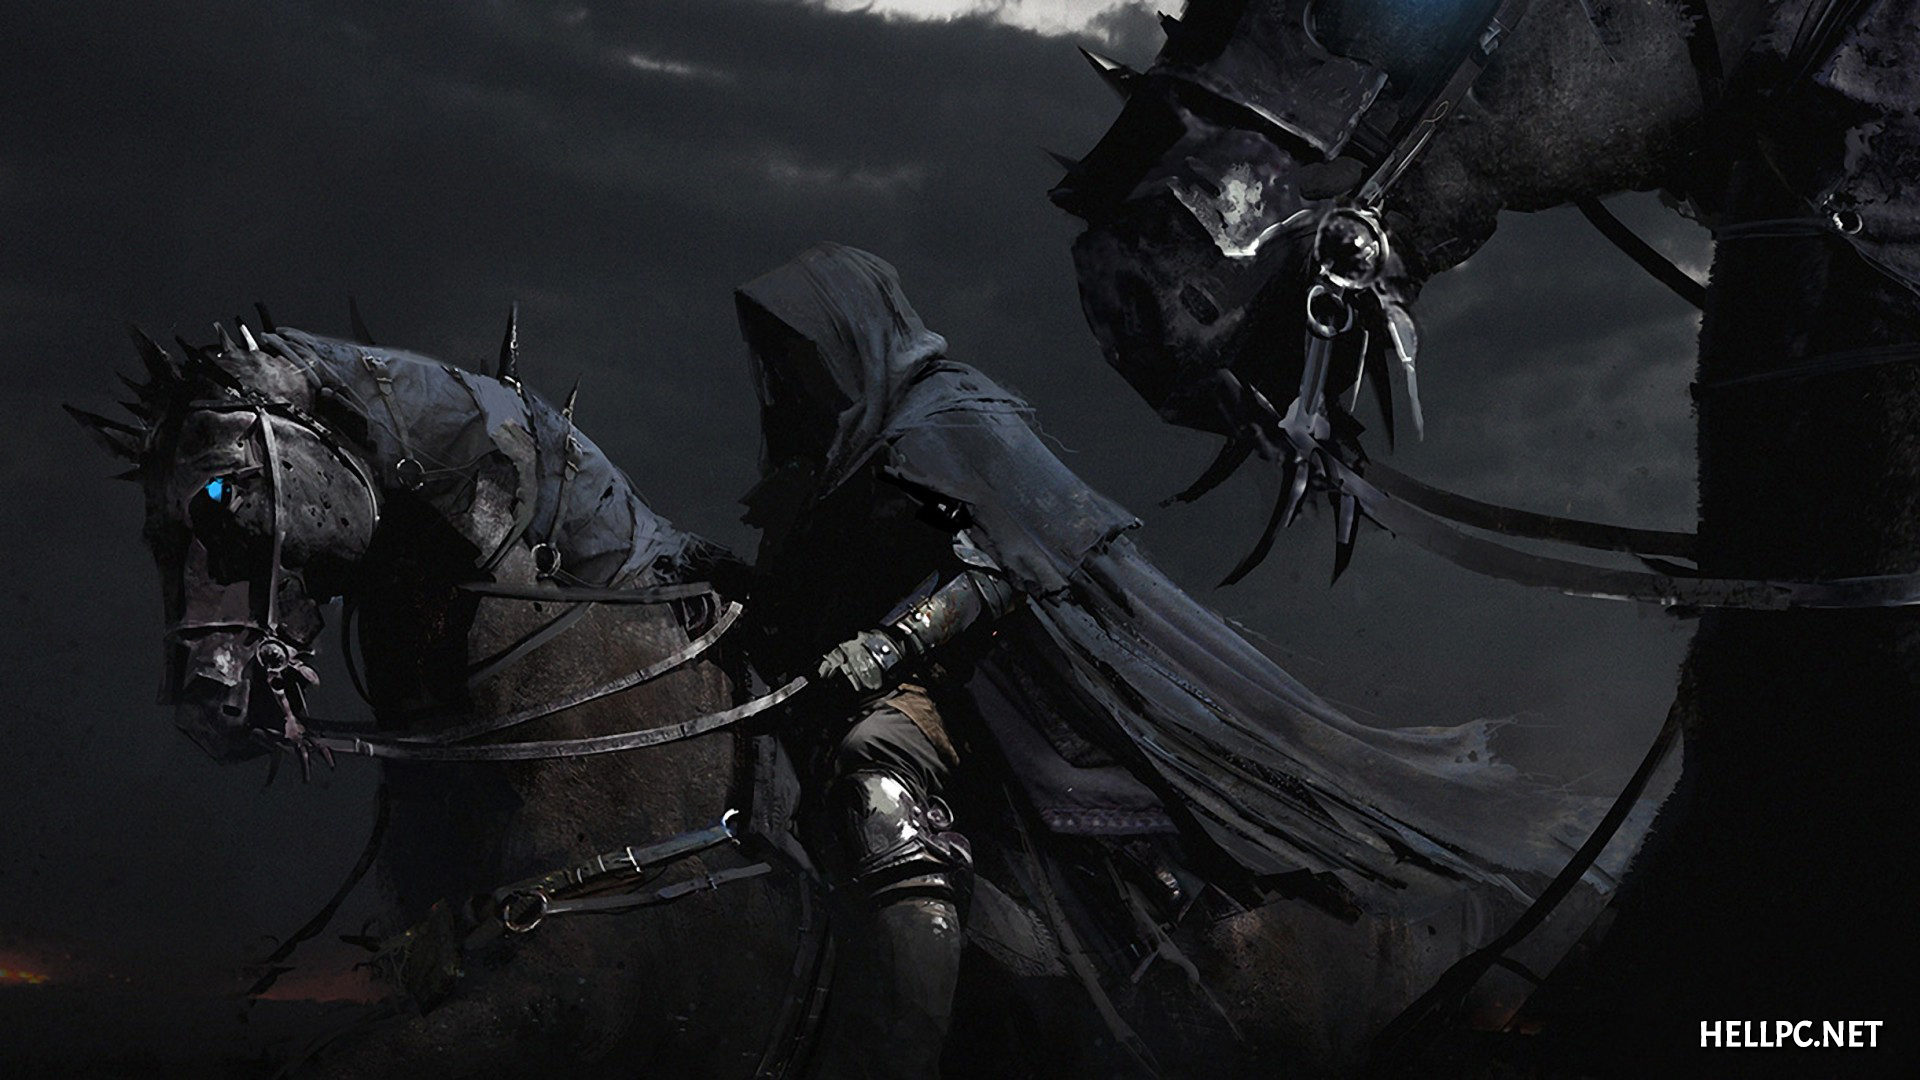 Top 10 Free Hd Wallpapers For Pc - Grim Reaper On Horse - HD Wallpaper 